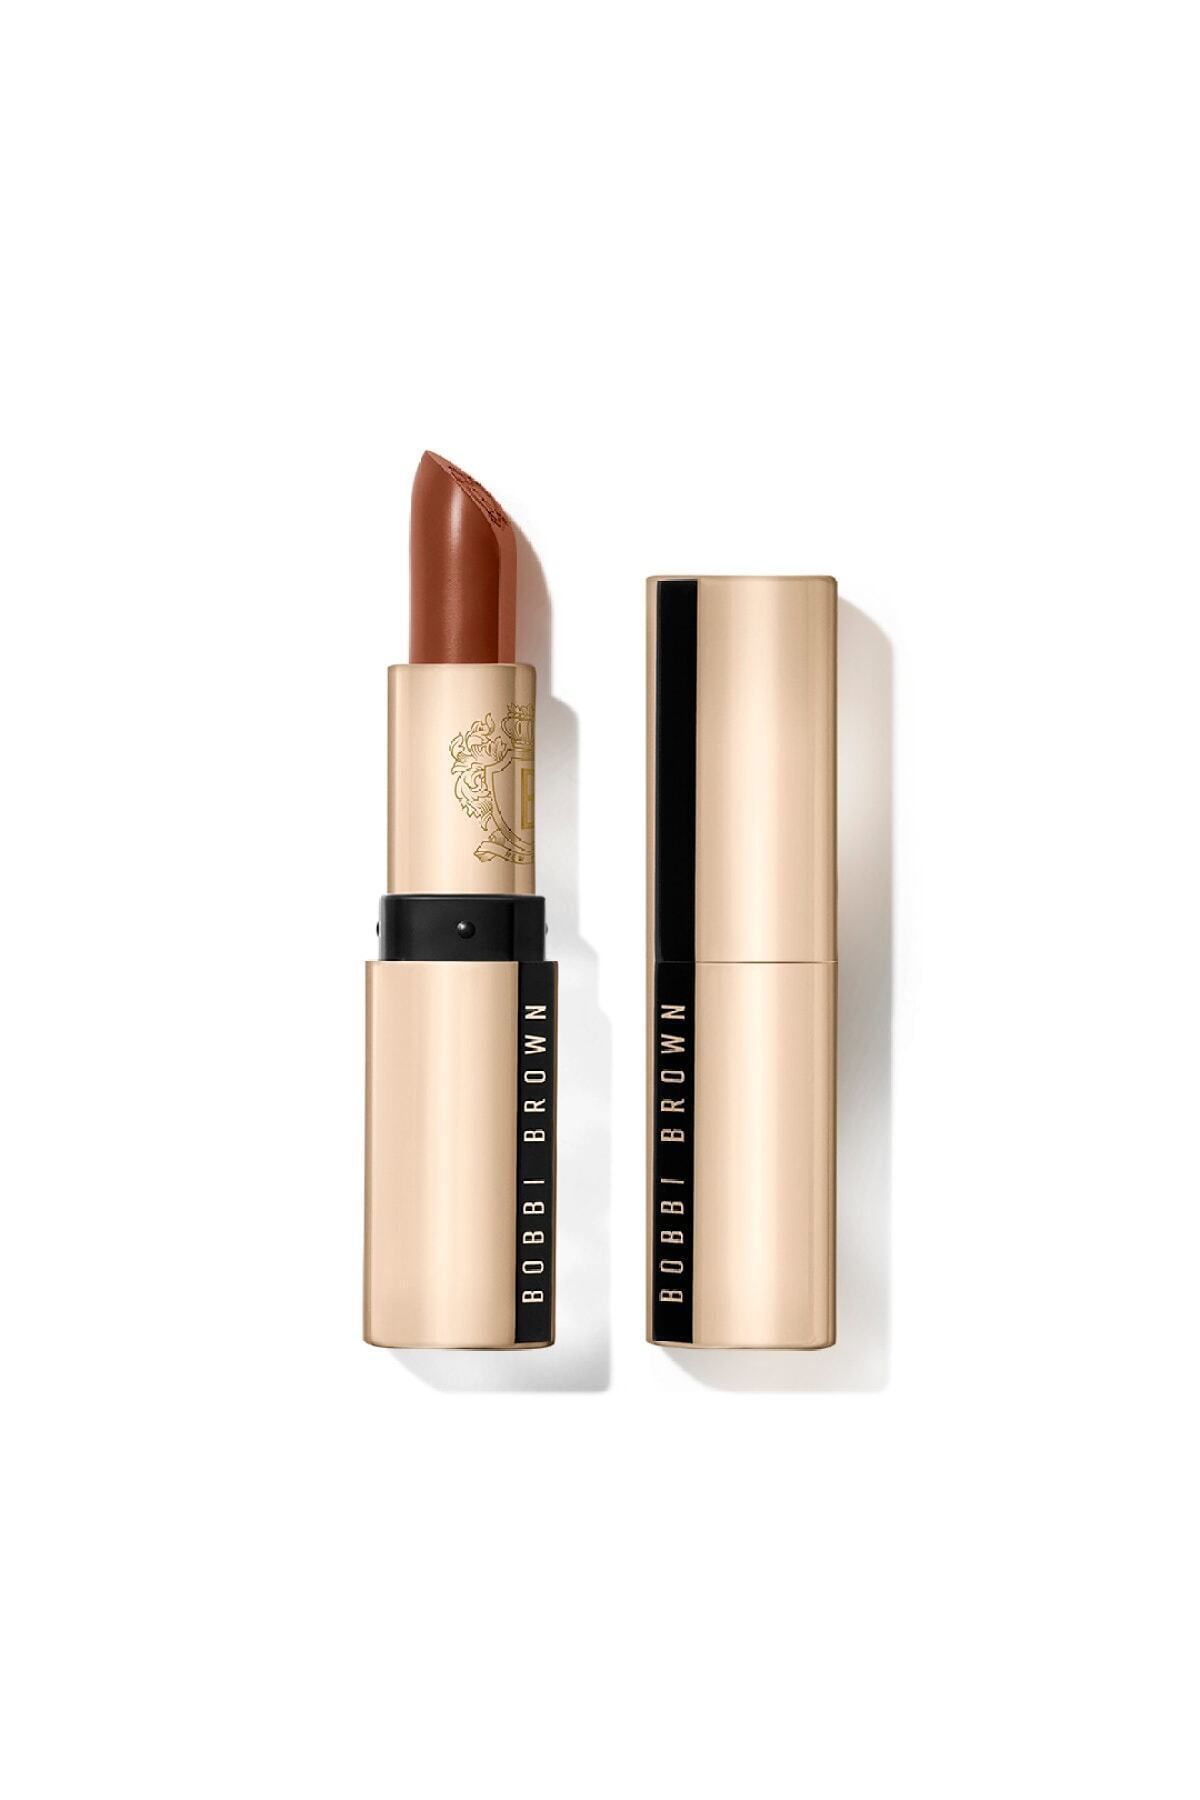 Bobbi Brown BOUTİQUE BROWN - LUXE INTENSELY PİGMENTED LİPSTİCK SATİN FİNİSH LİPSTİCK - PSSN1377